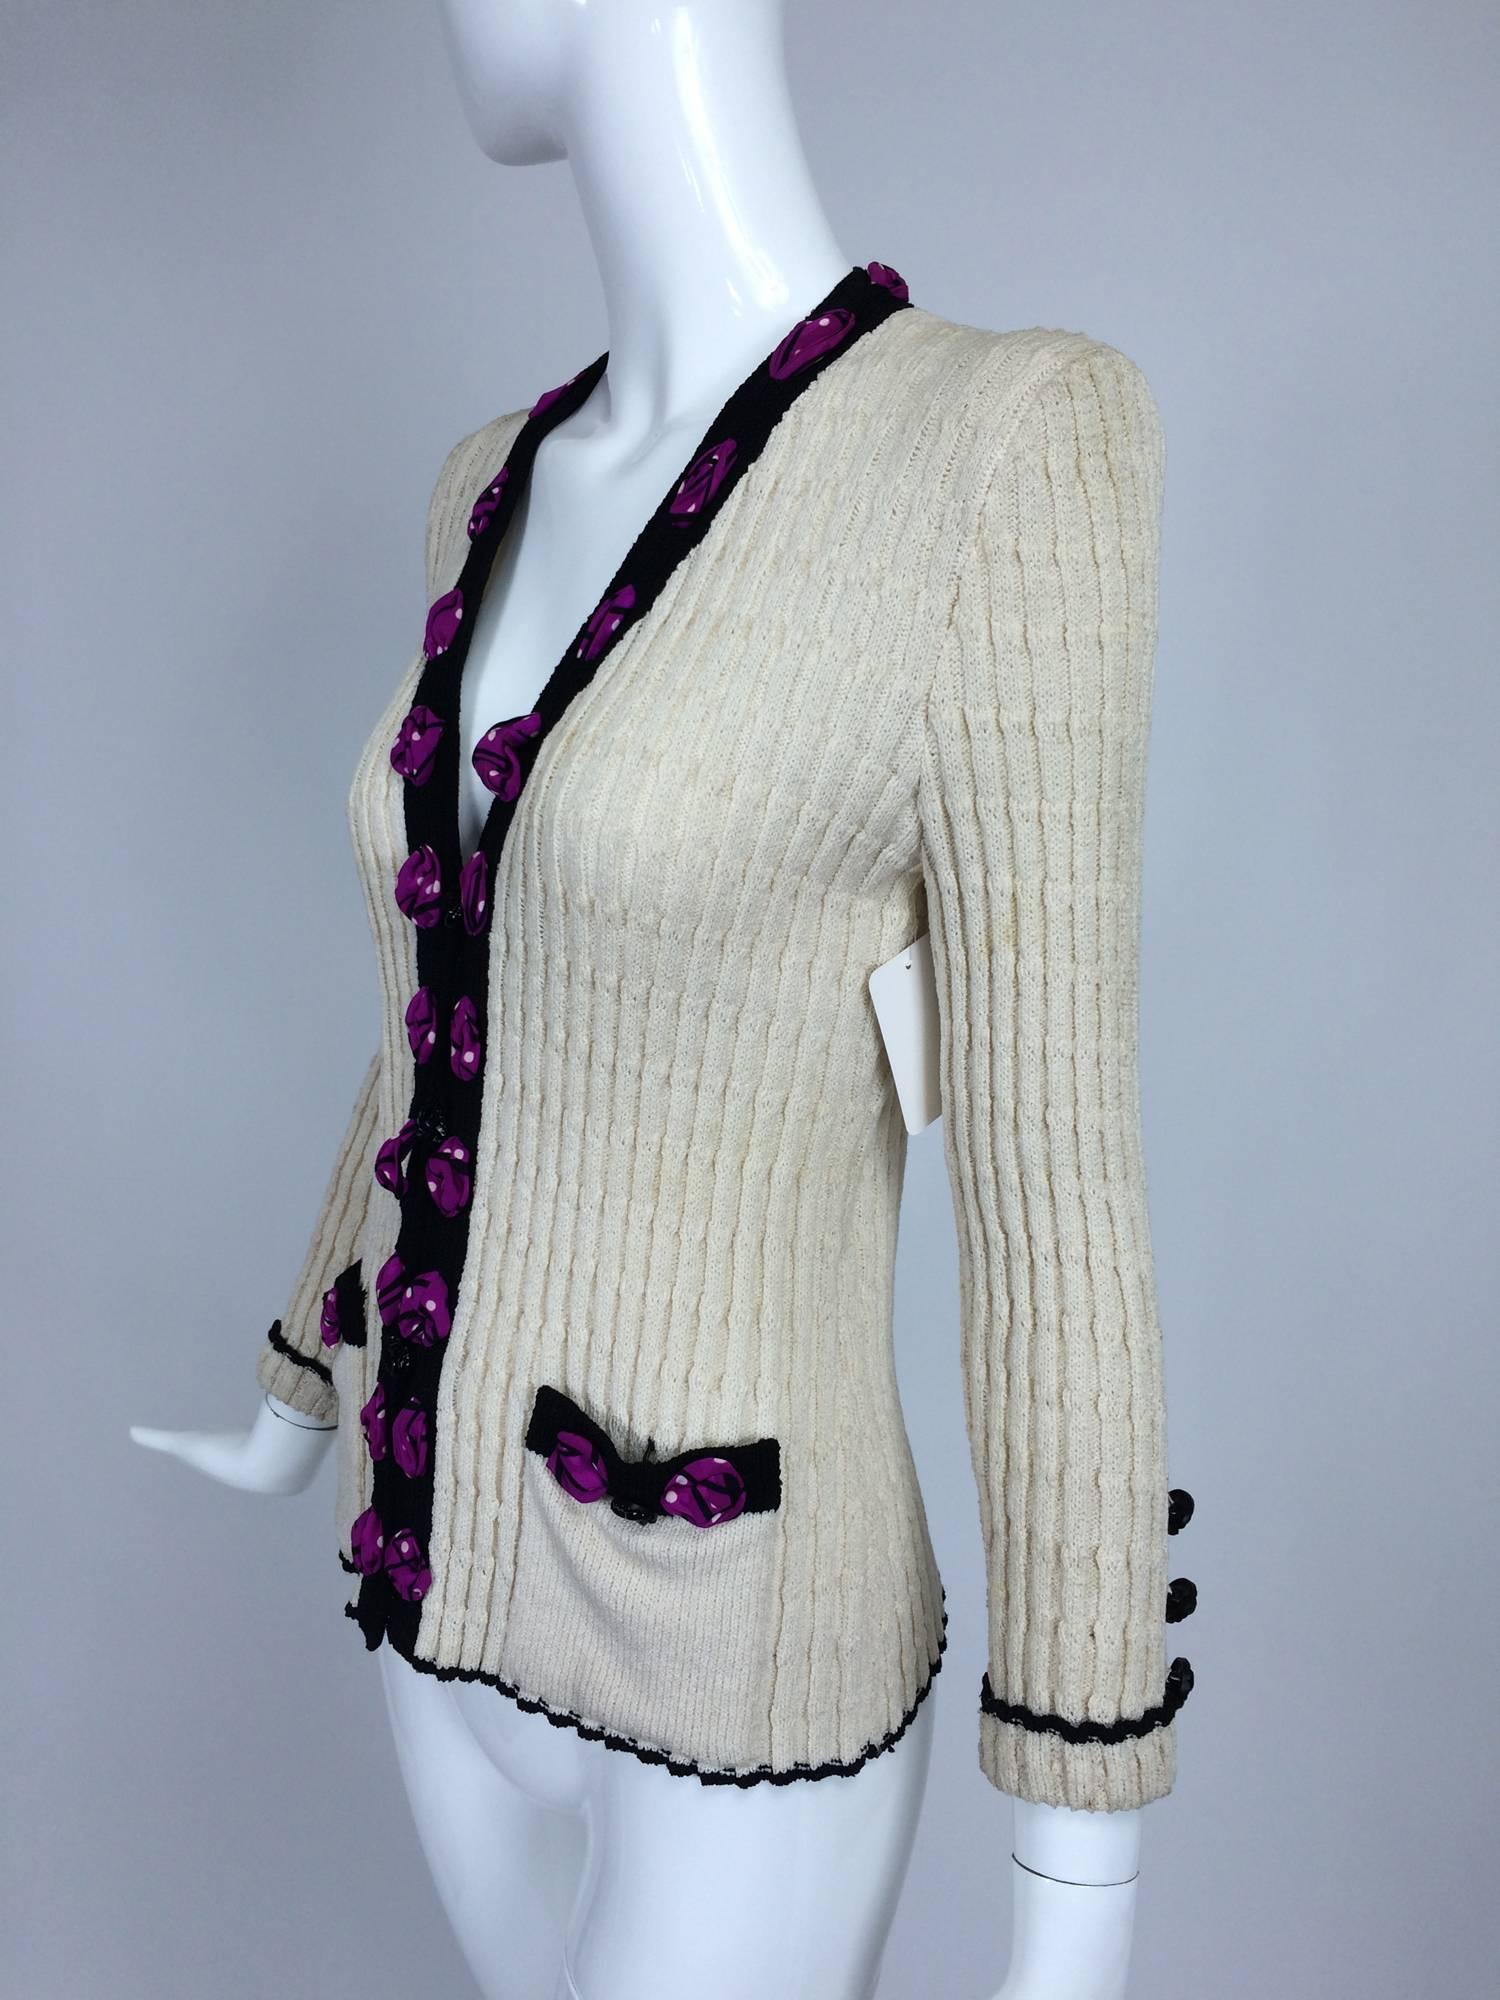 Adolfo cream cable knit rosette trimmed cardigan sweater/jacket 1970s...Fitted cable knit V front sweater is trimmed in black knit and has appliqued silk fabric rosettes on the front facings and pockets...Closes with black glass buttons, there are